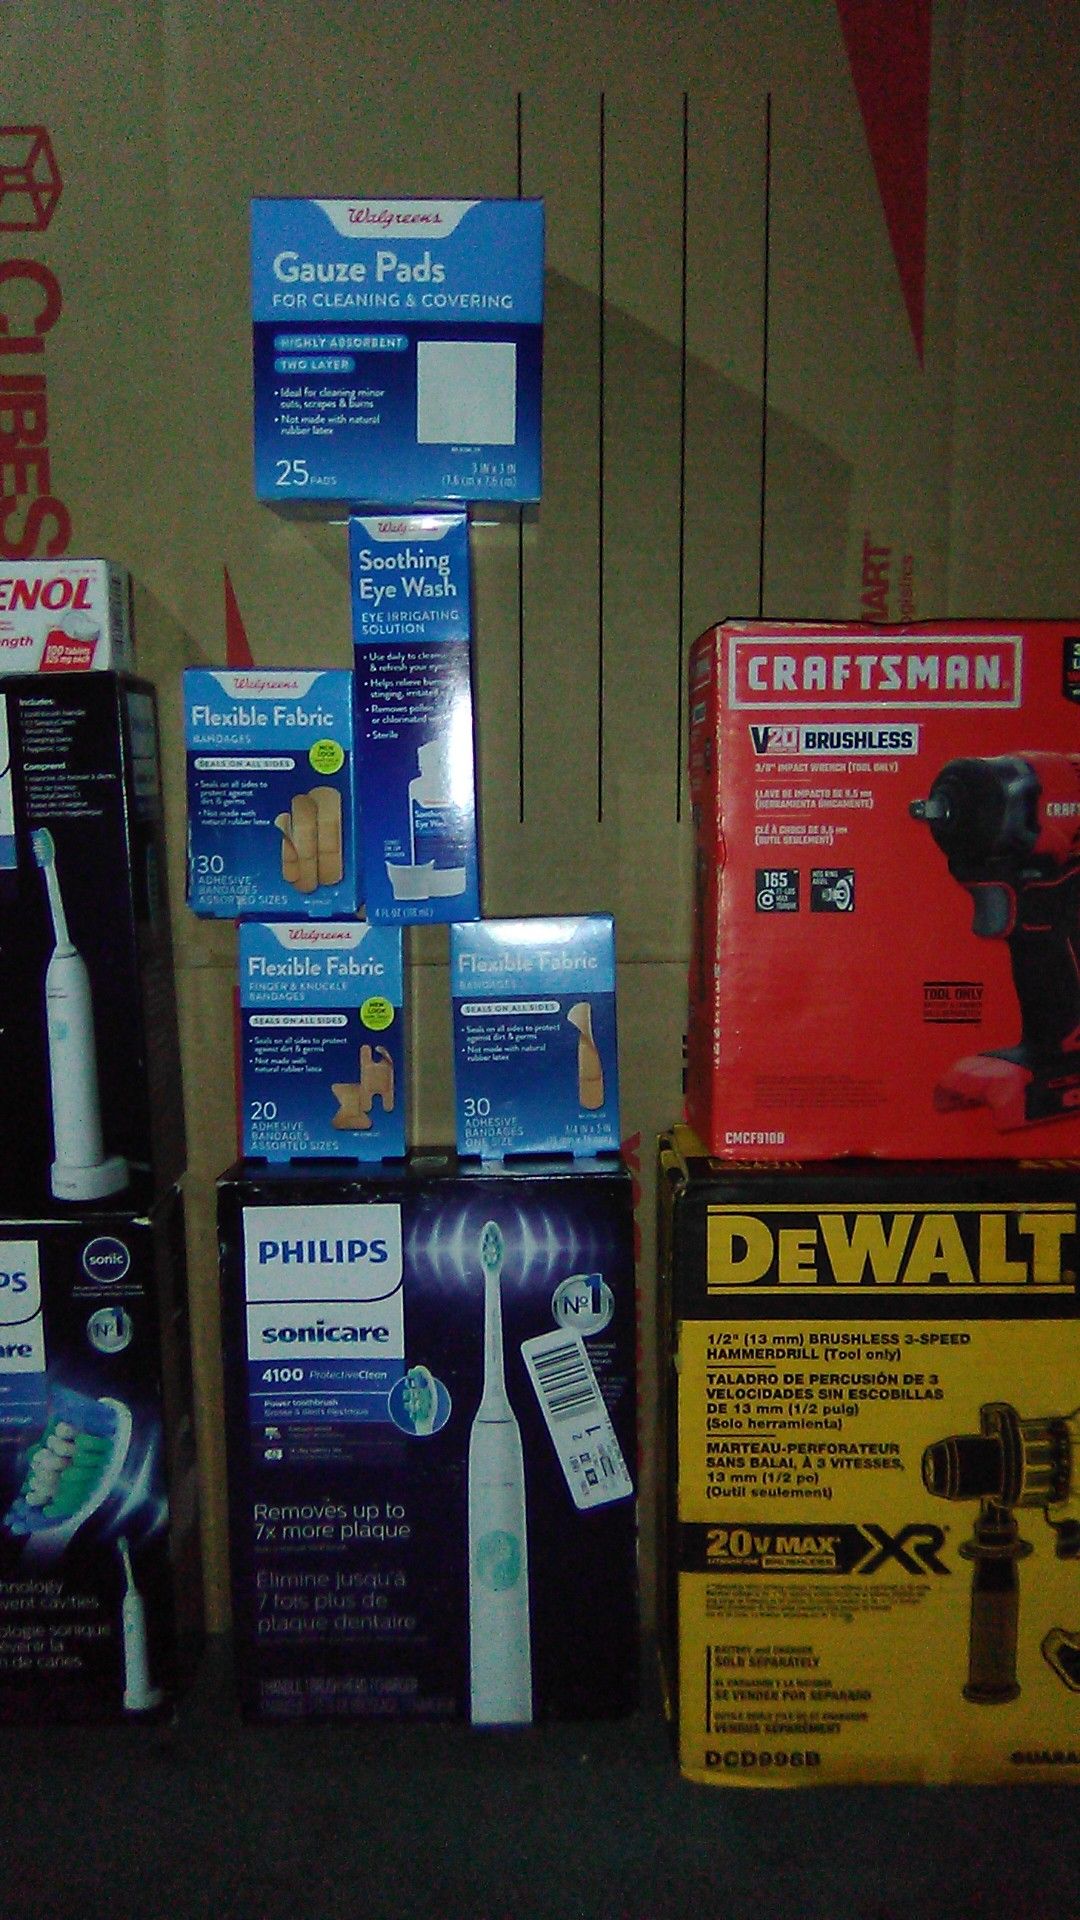 3/8 craftsman impact wrench, 1/2" DeWalt Hammer drill, 3 sonicare sets, boxes of Band-Aids and Tylenol